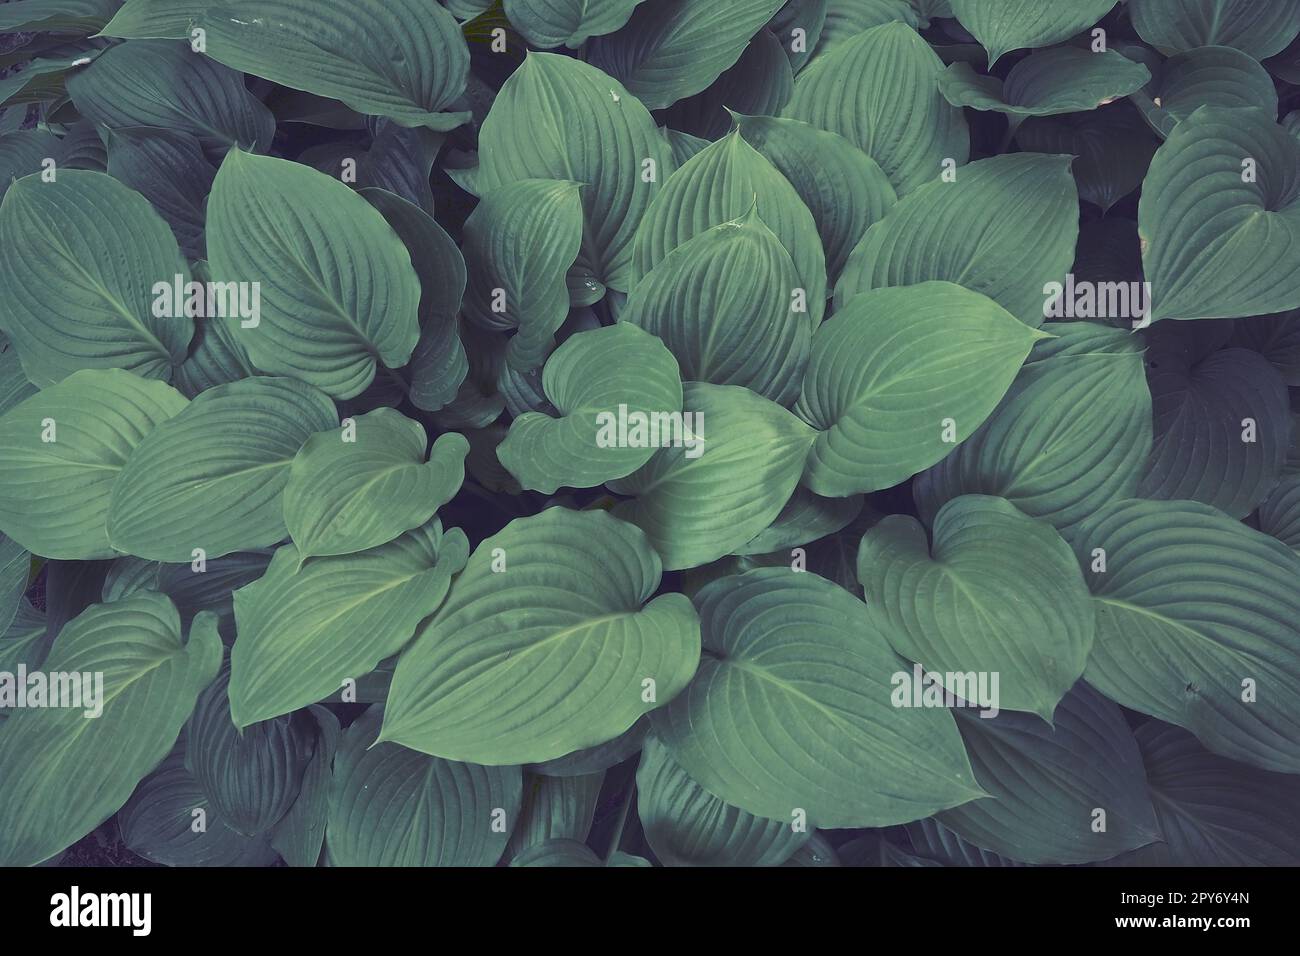 Hosta, a genus of perennial herbaceous plants of the Asparagus family. Horticulture and landscape design. Shade-tolerant ornamental deciduous plants. Green leaves with water drops. Stock Photo